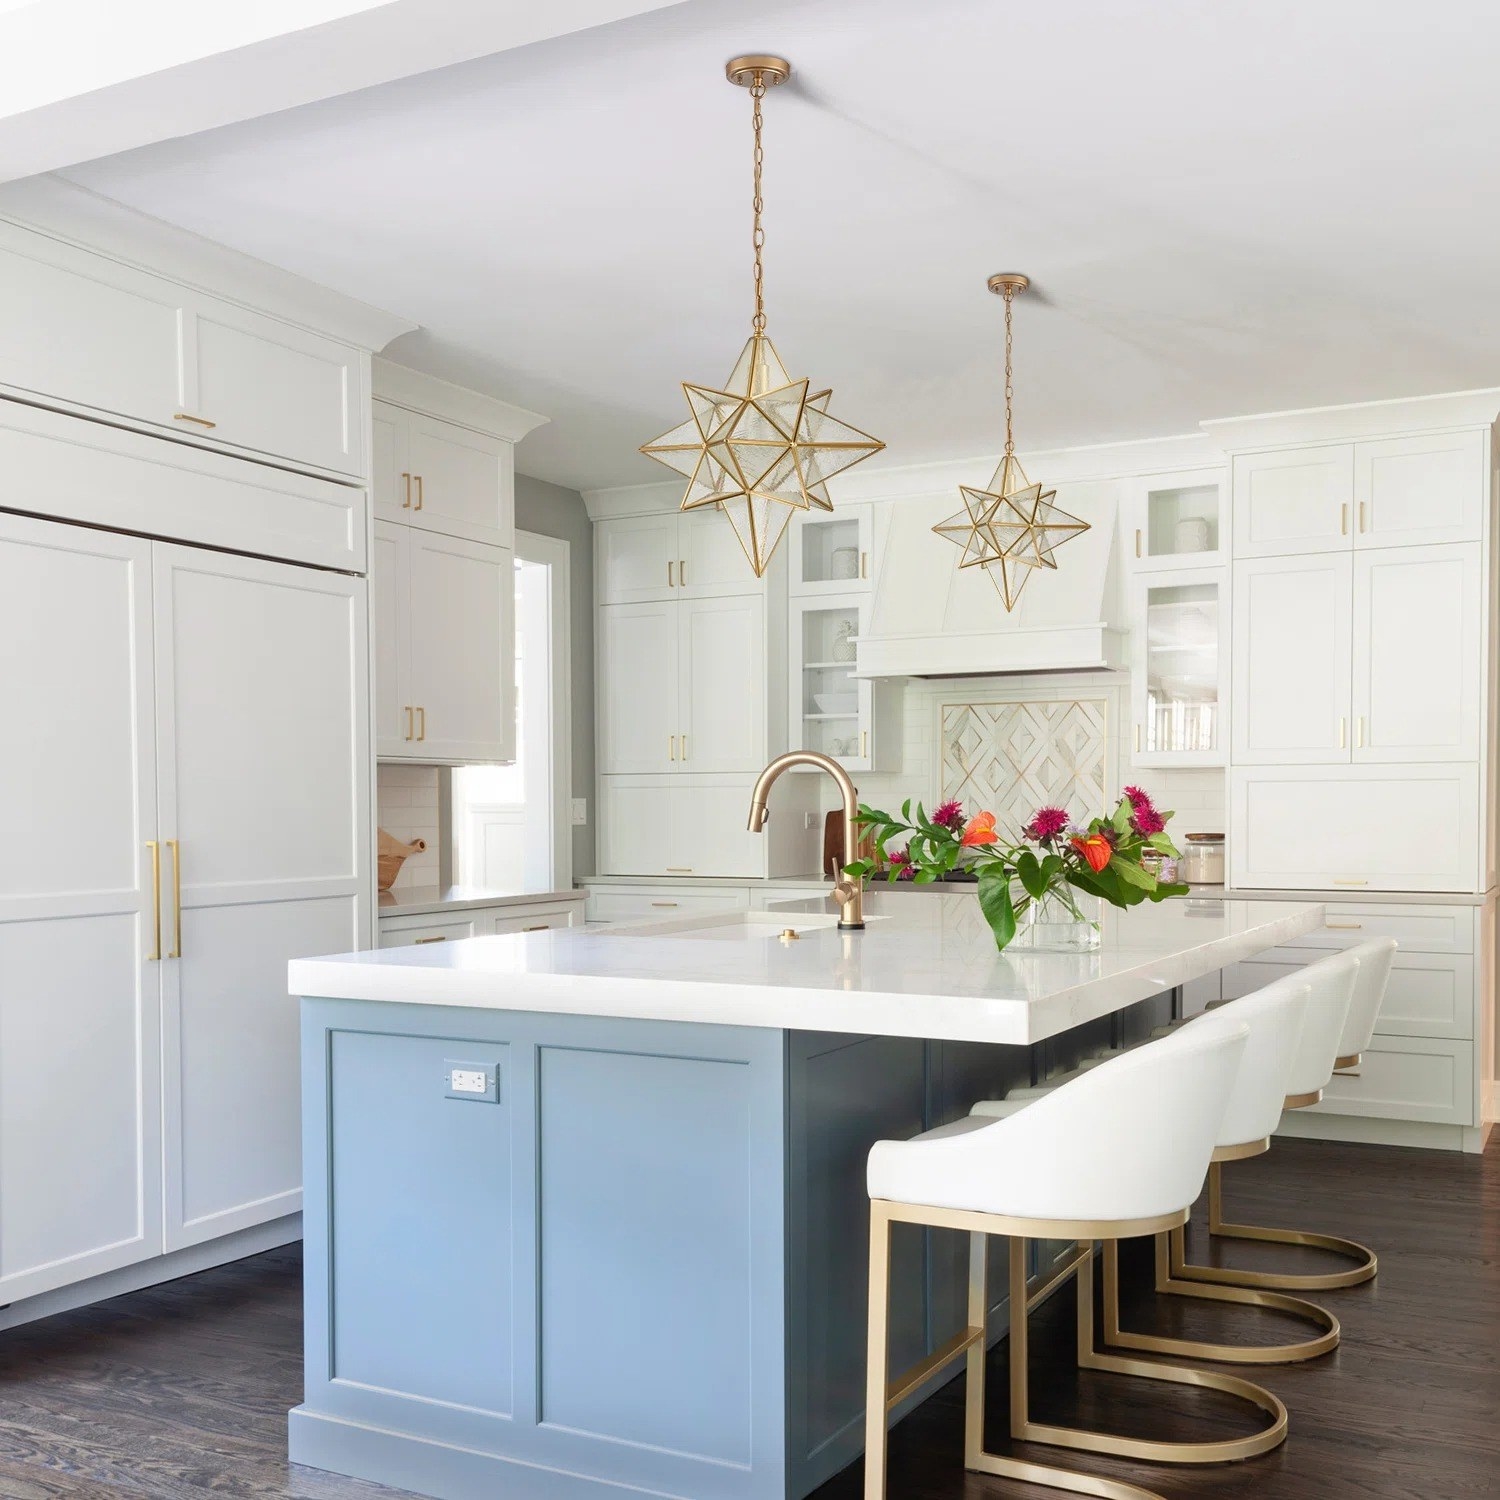 the gold and glass star pendant lights over a kitchen island